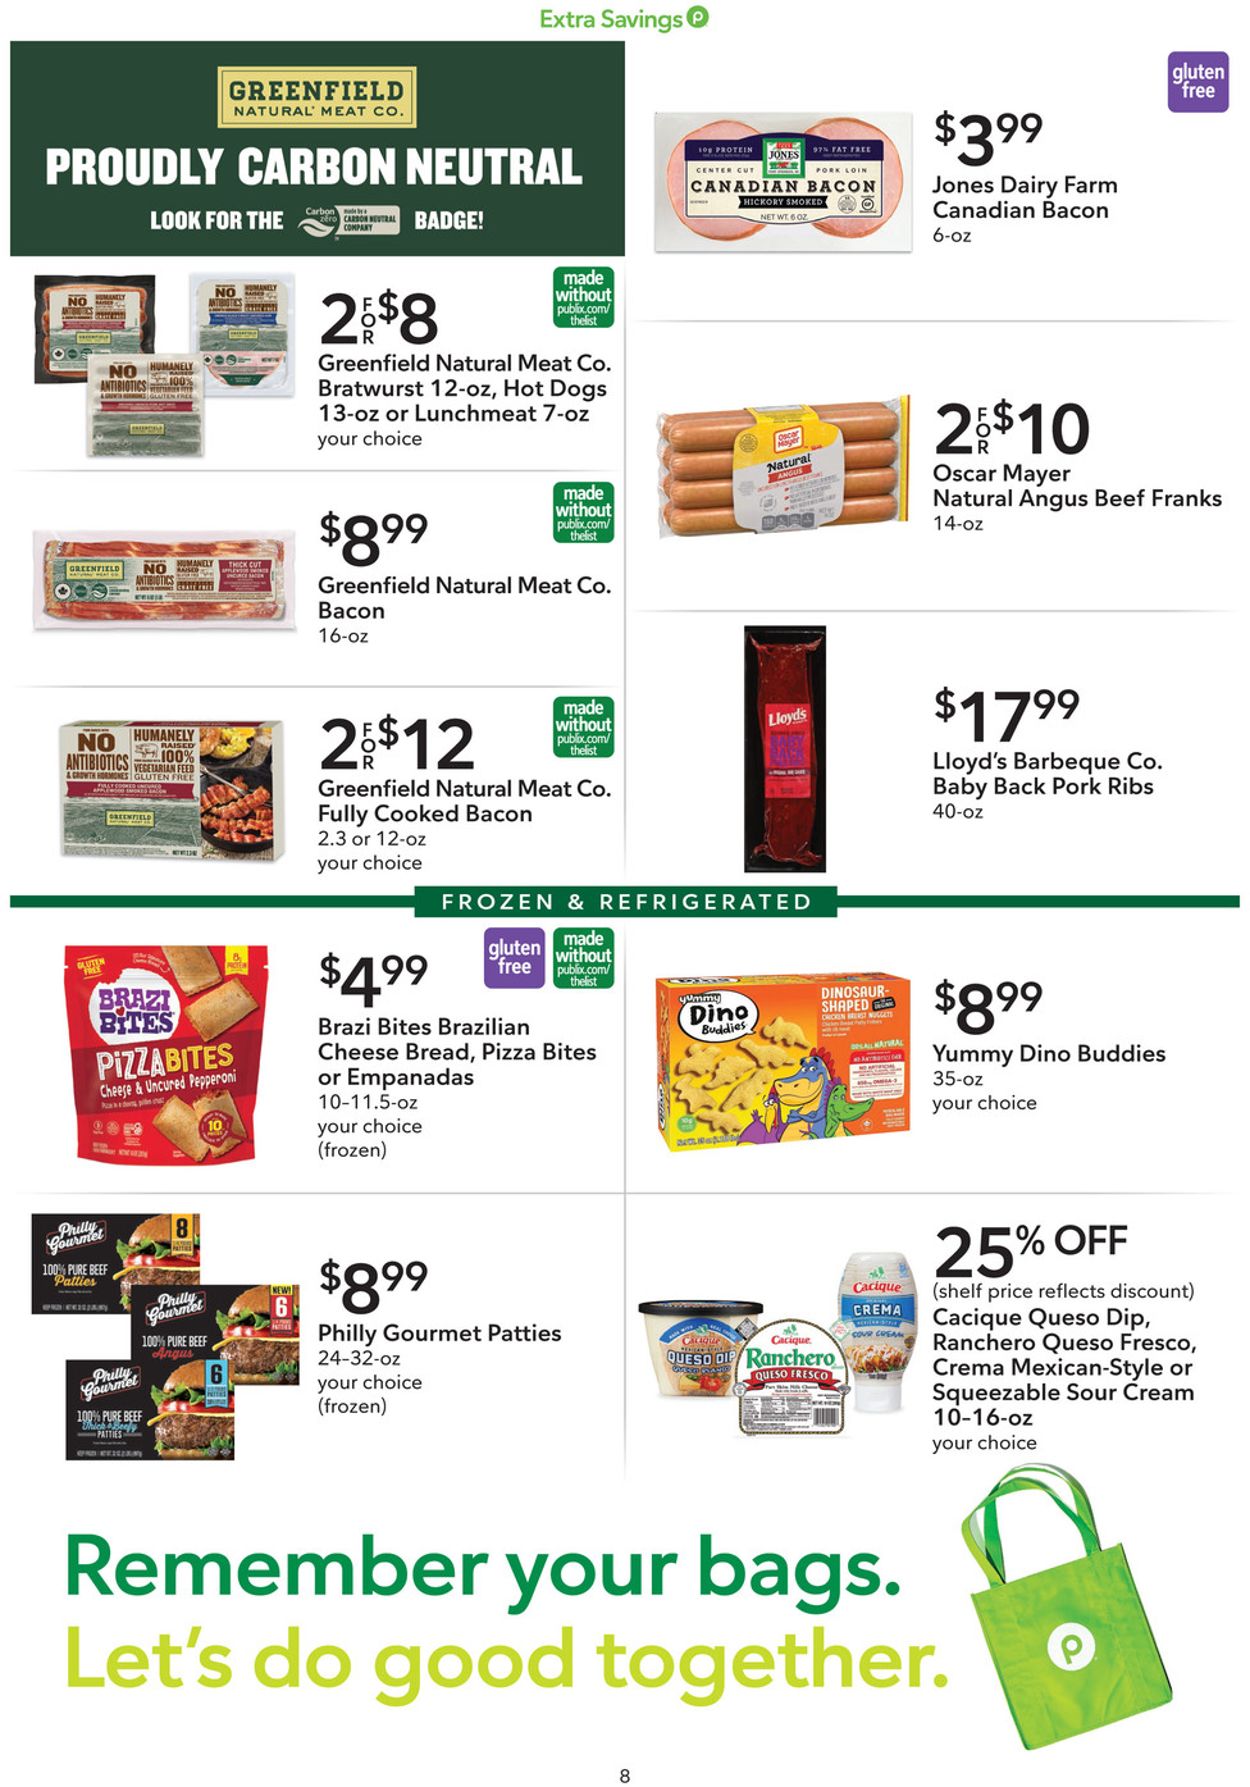 Publix Current weekly ad 08/27 09/09/2022 [8]